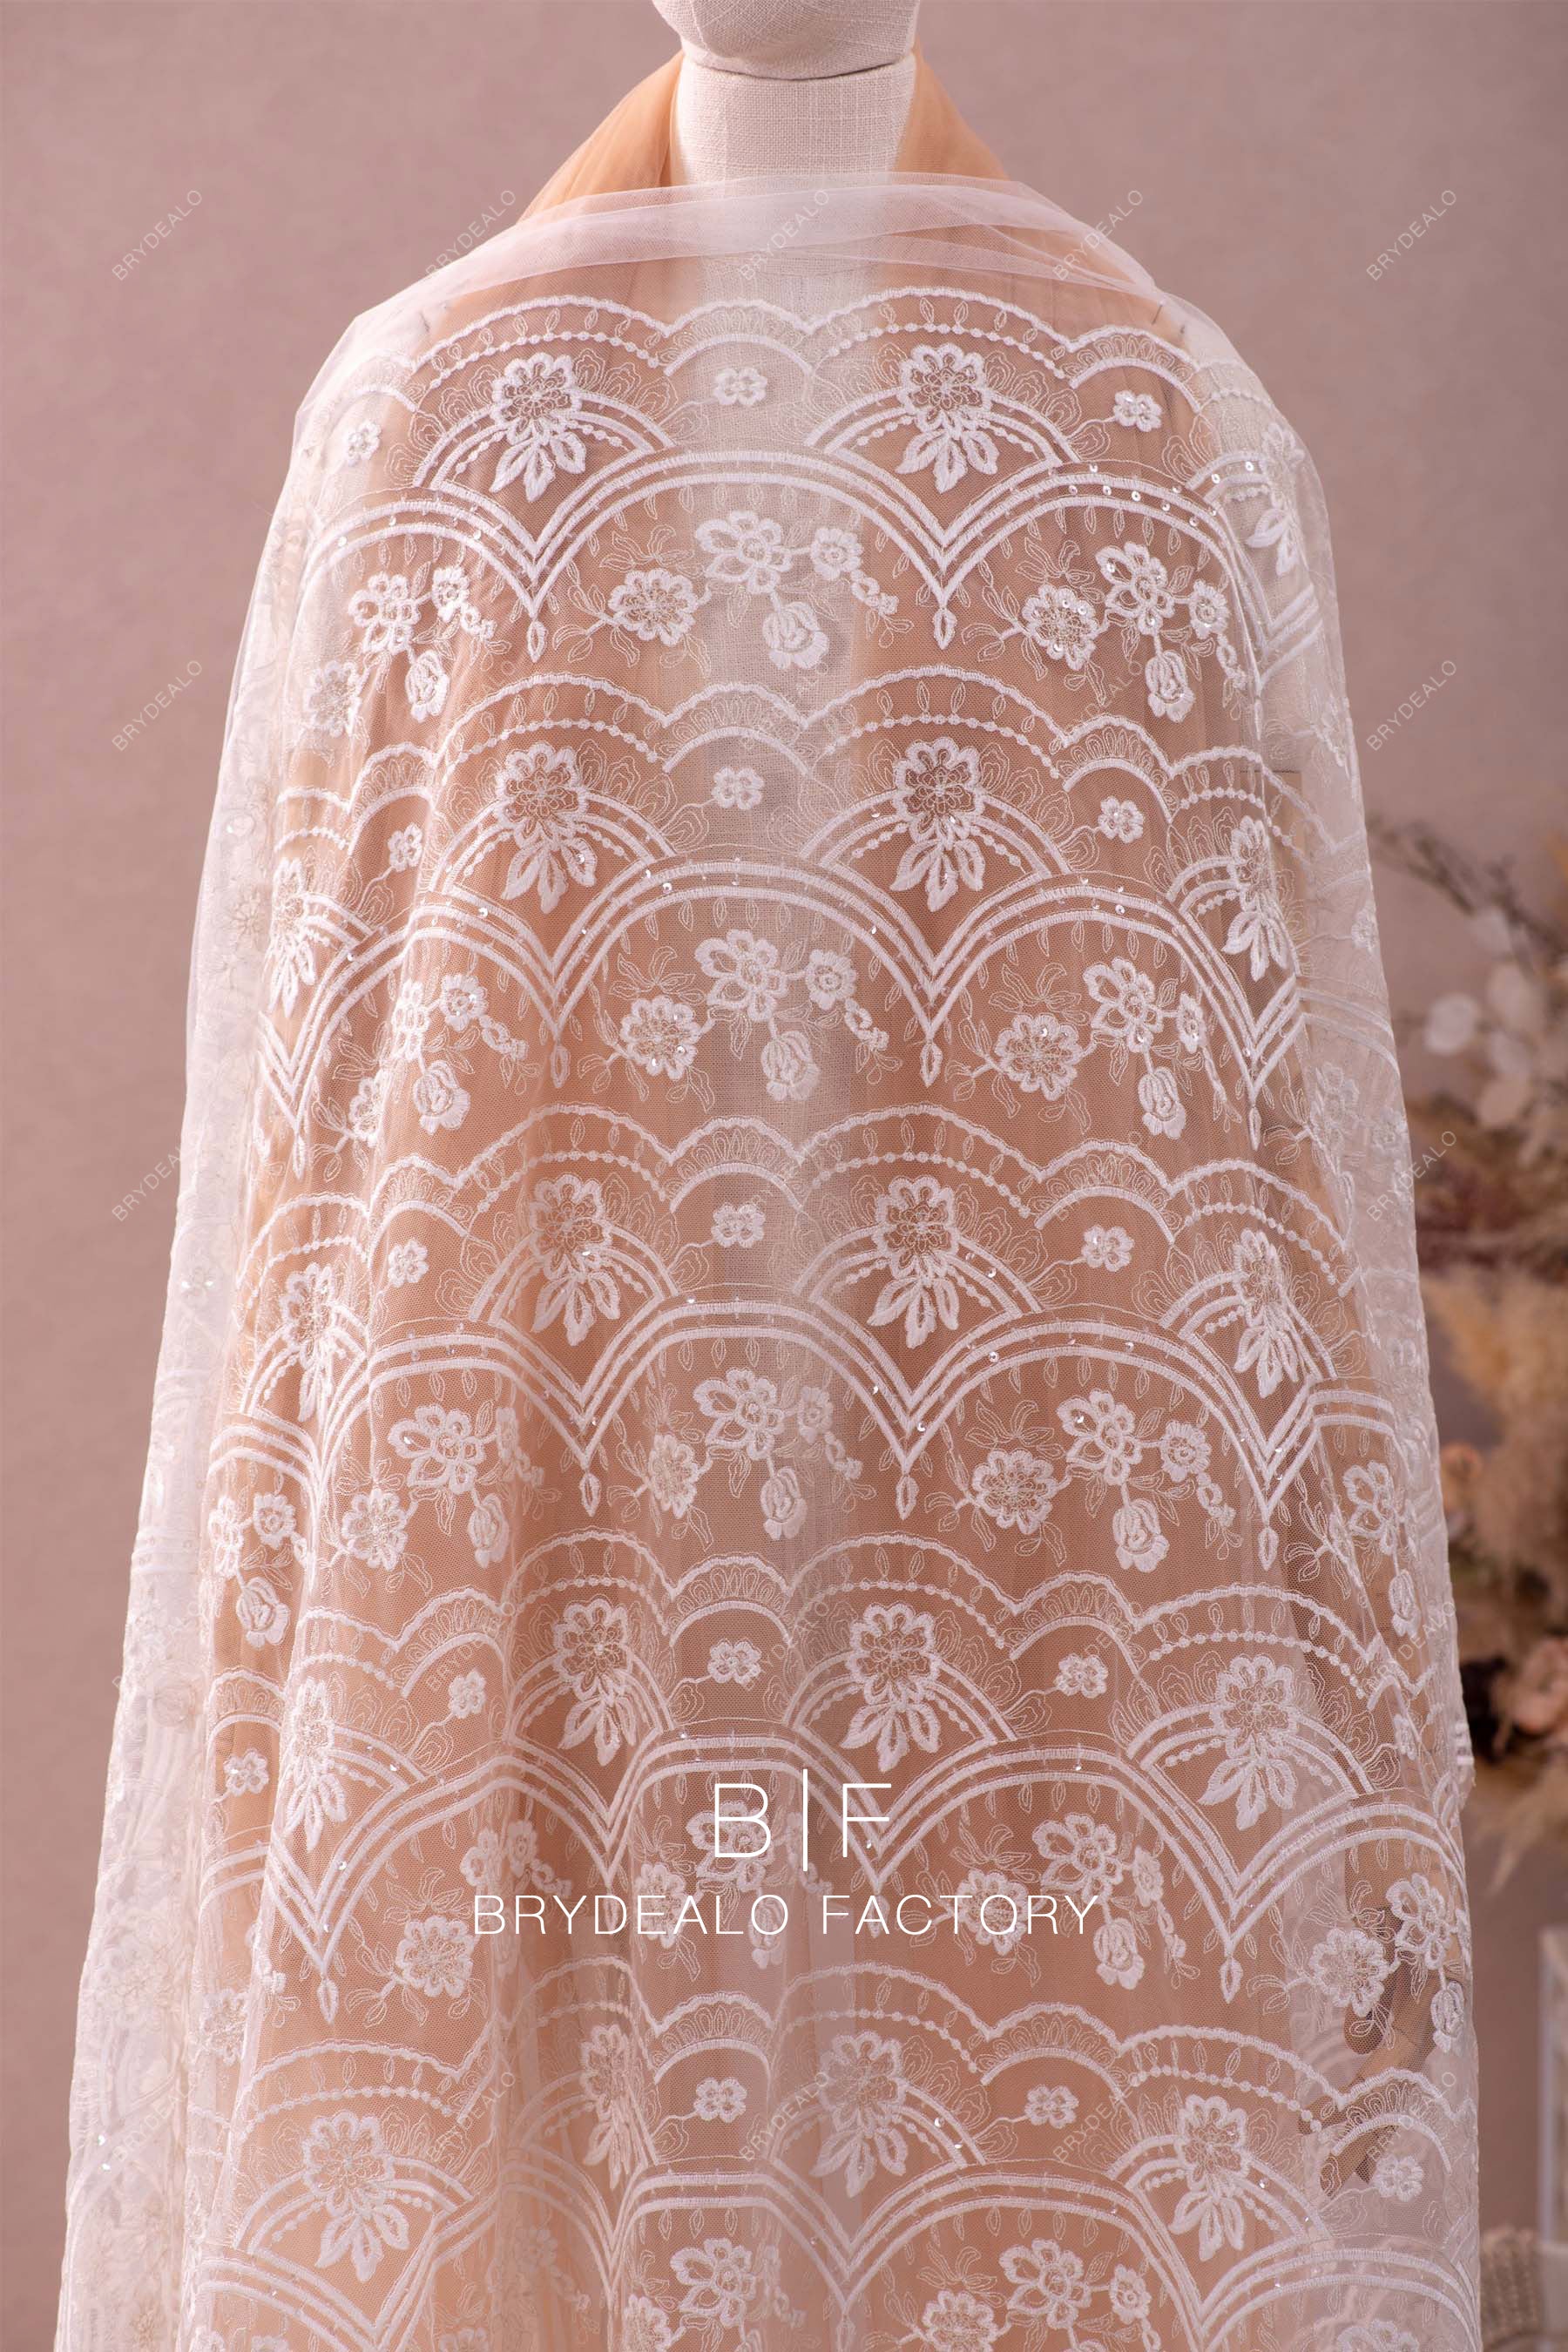 clear sequin scalloped lace fabric